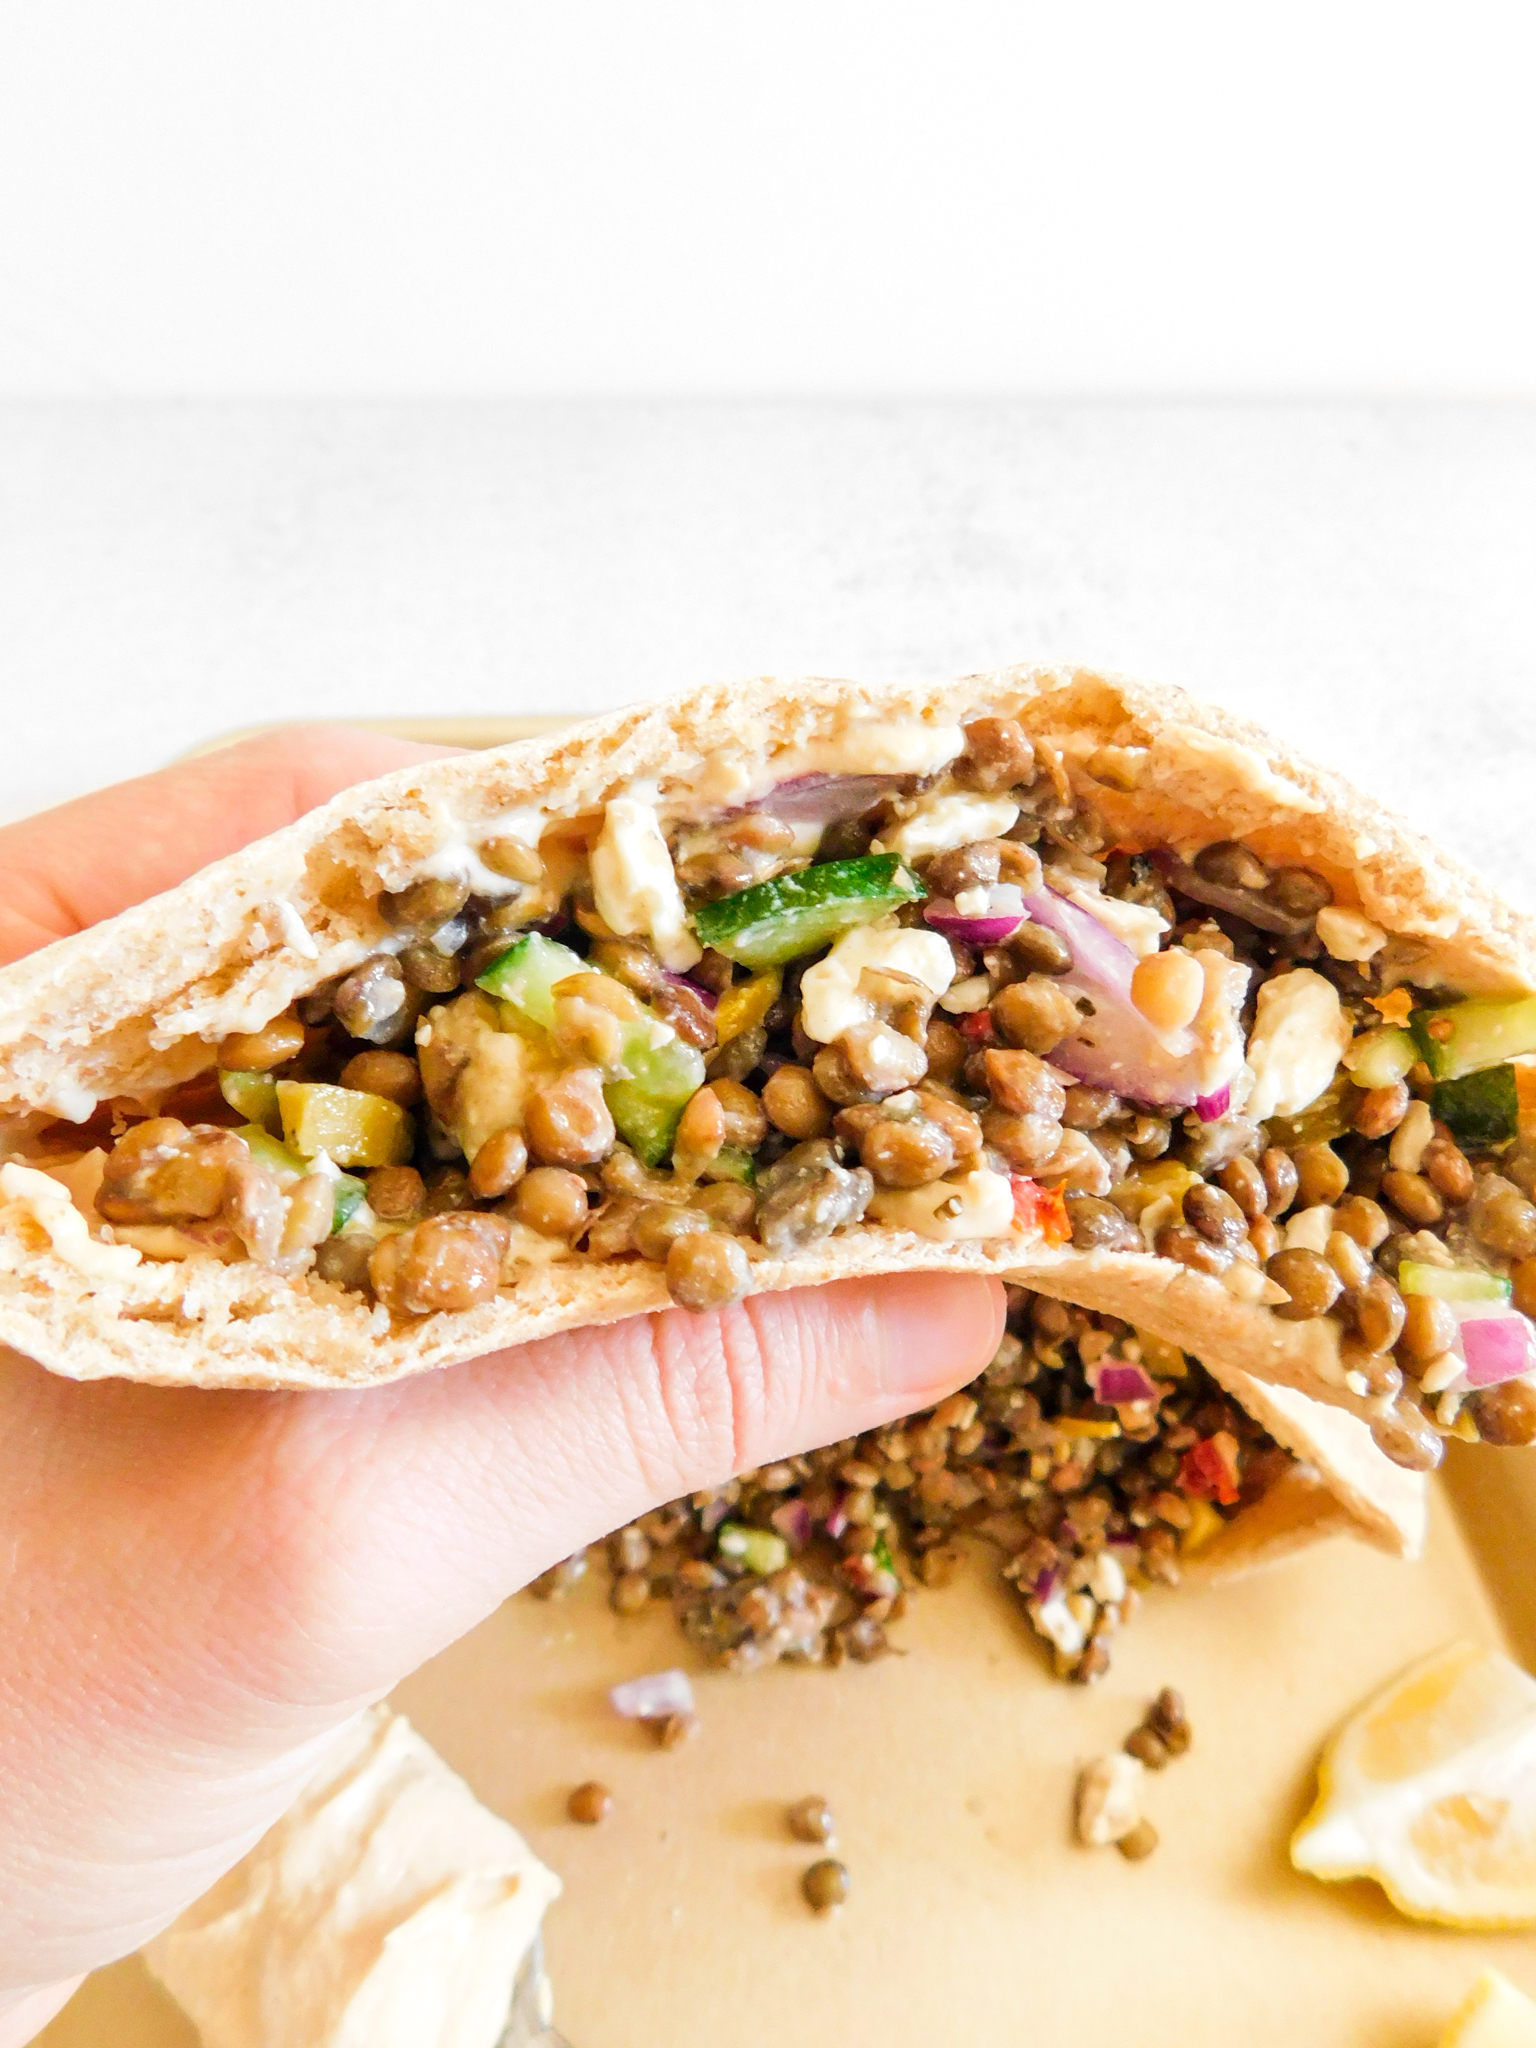 Pita pockets are perfect for lunchboxes